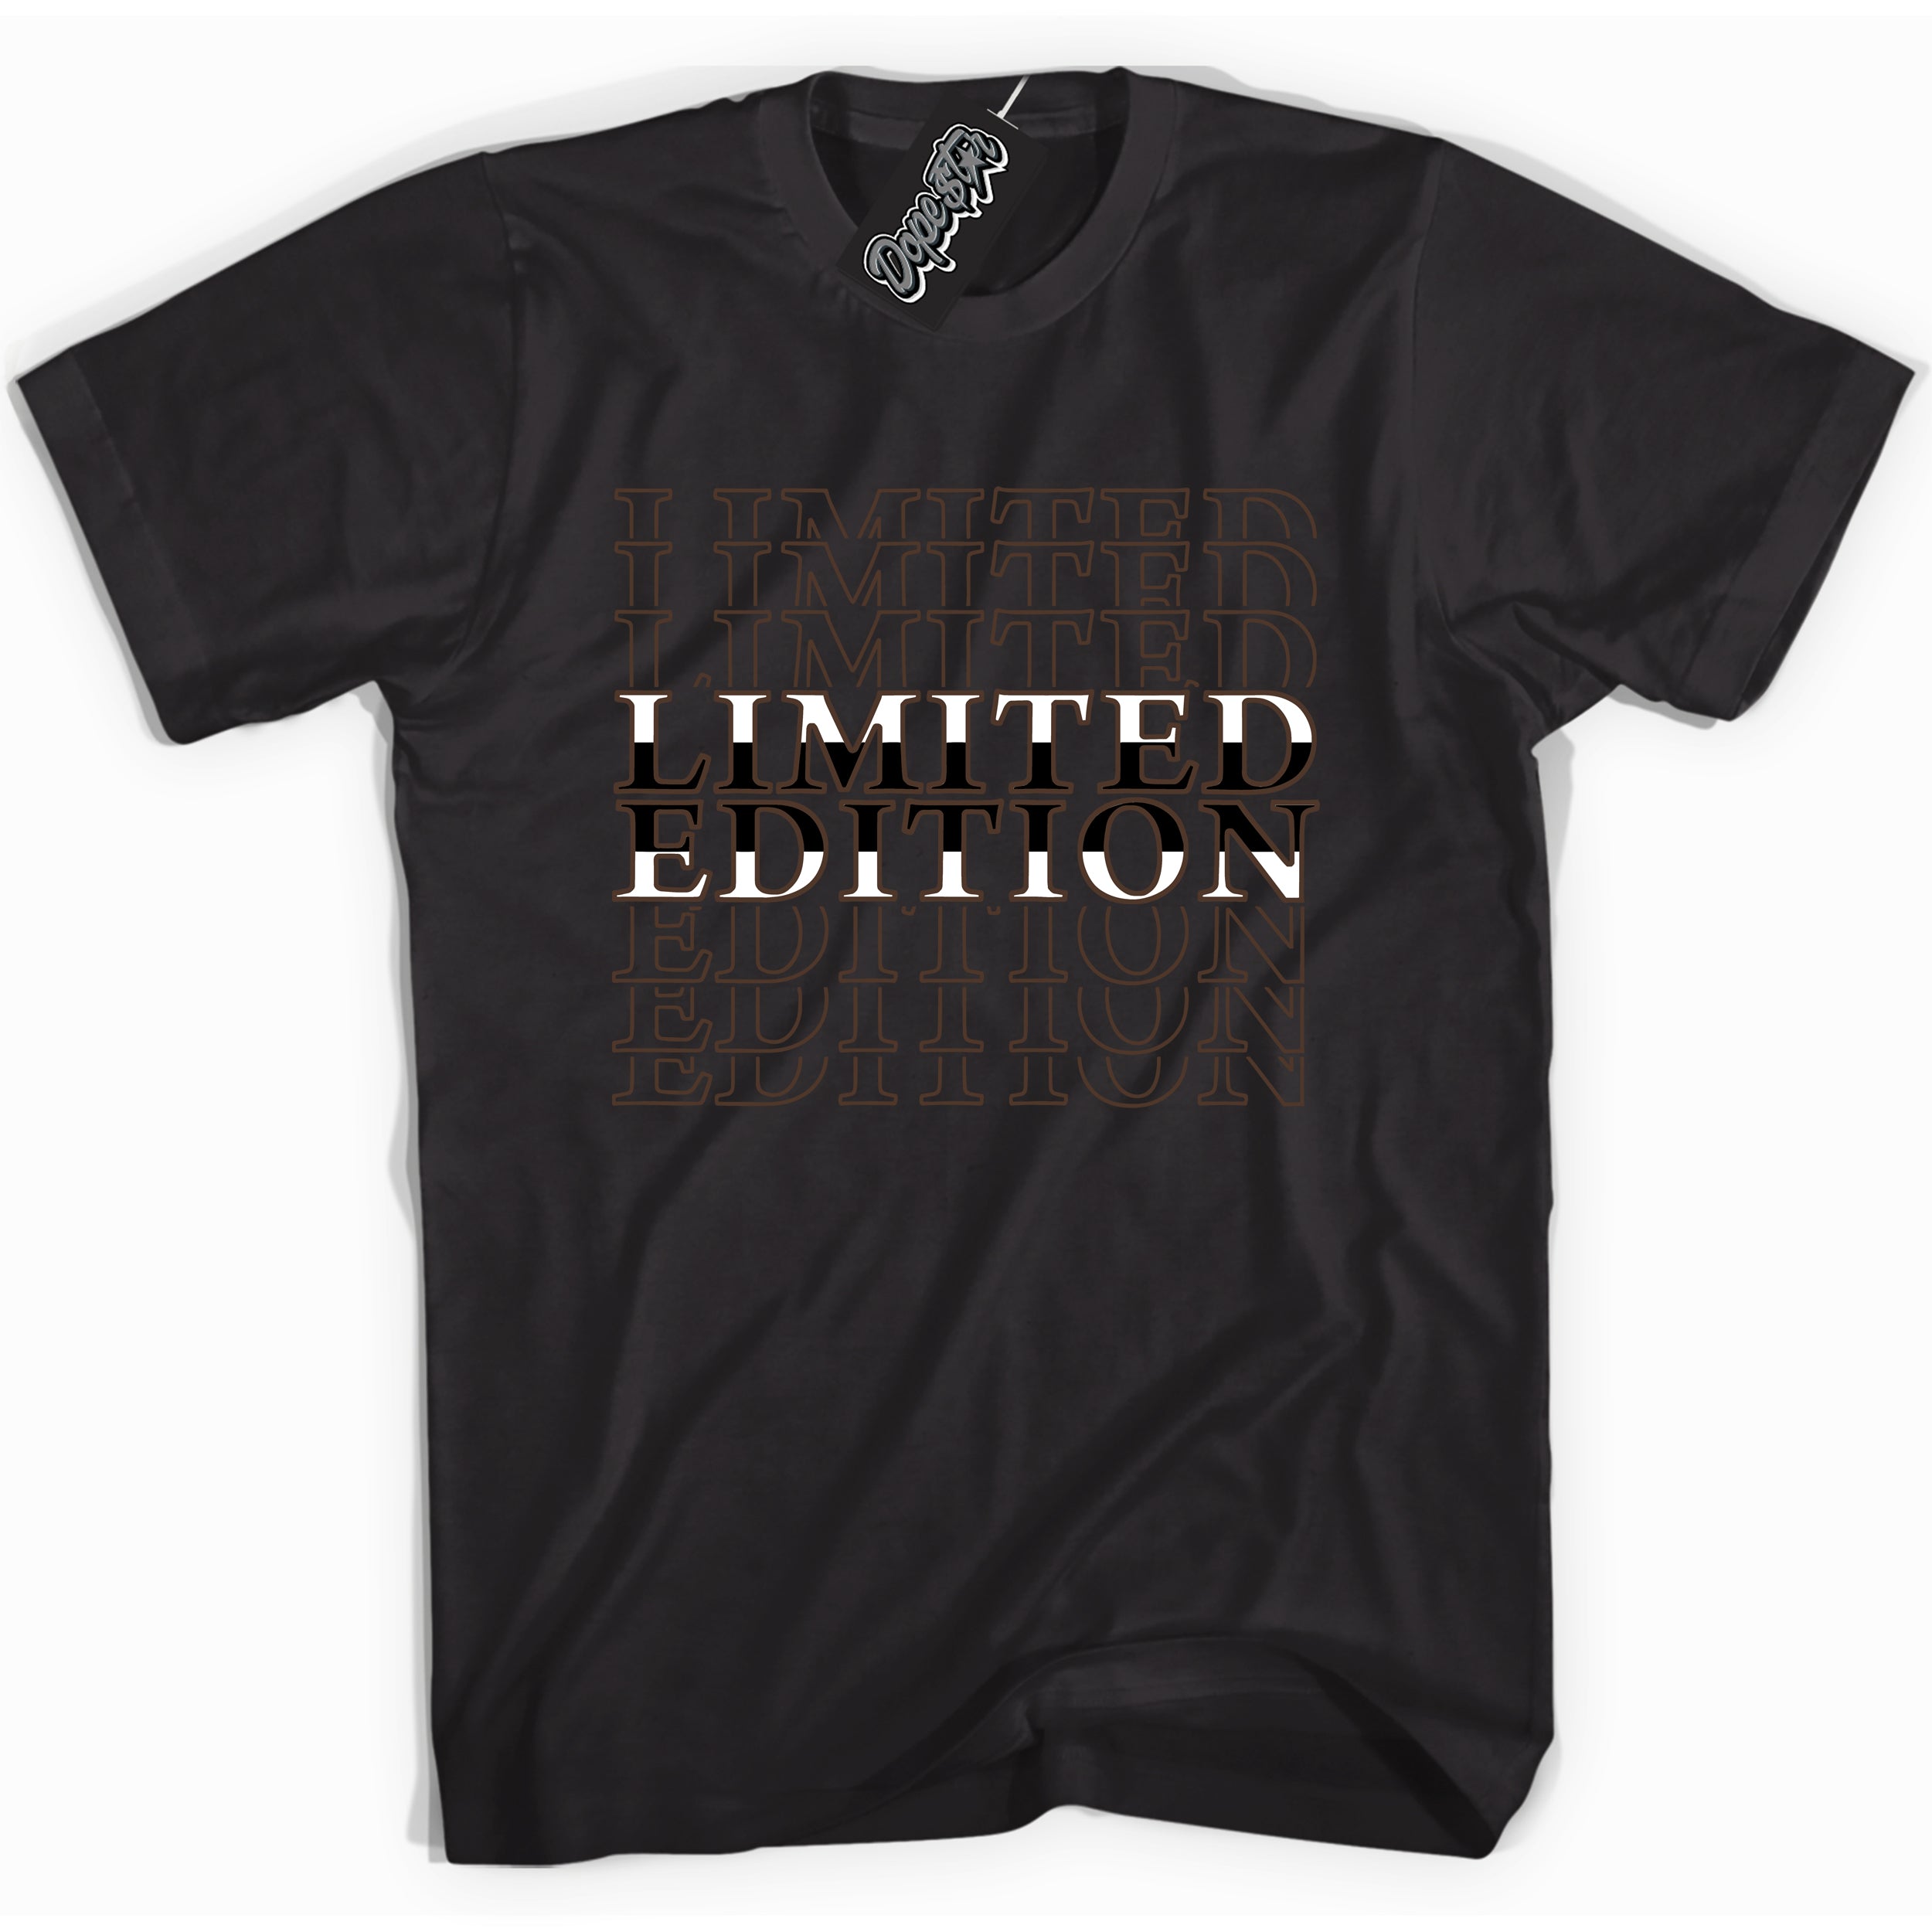 Cool Black graphic tee with “ Limited Edition ” design, that perfectly matches Palomino 1s sneakers 